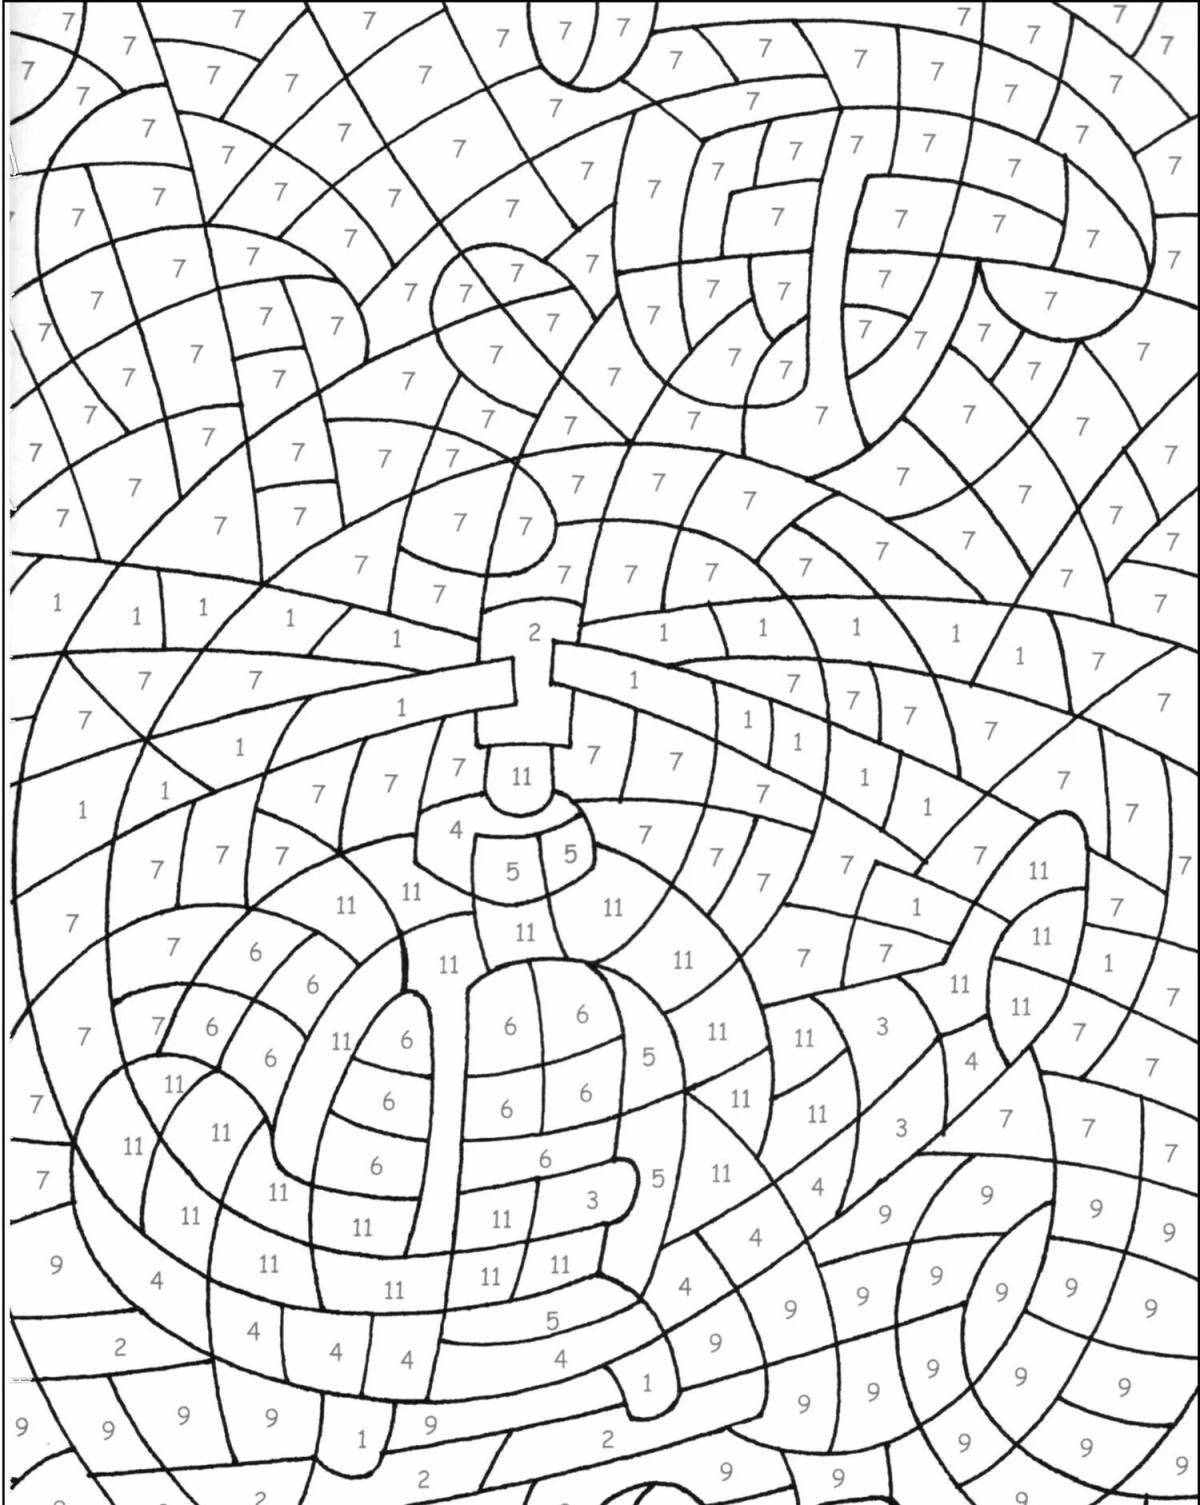 Creative coloring game by cells and numbers